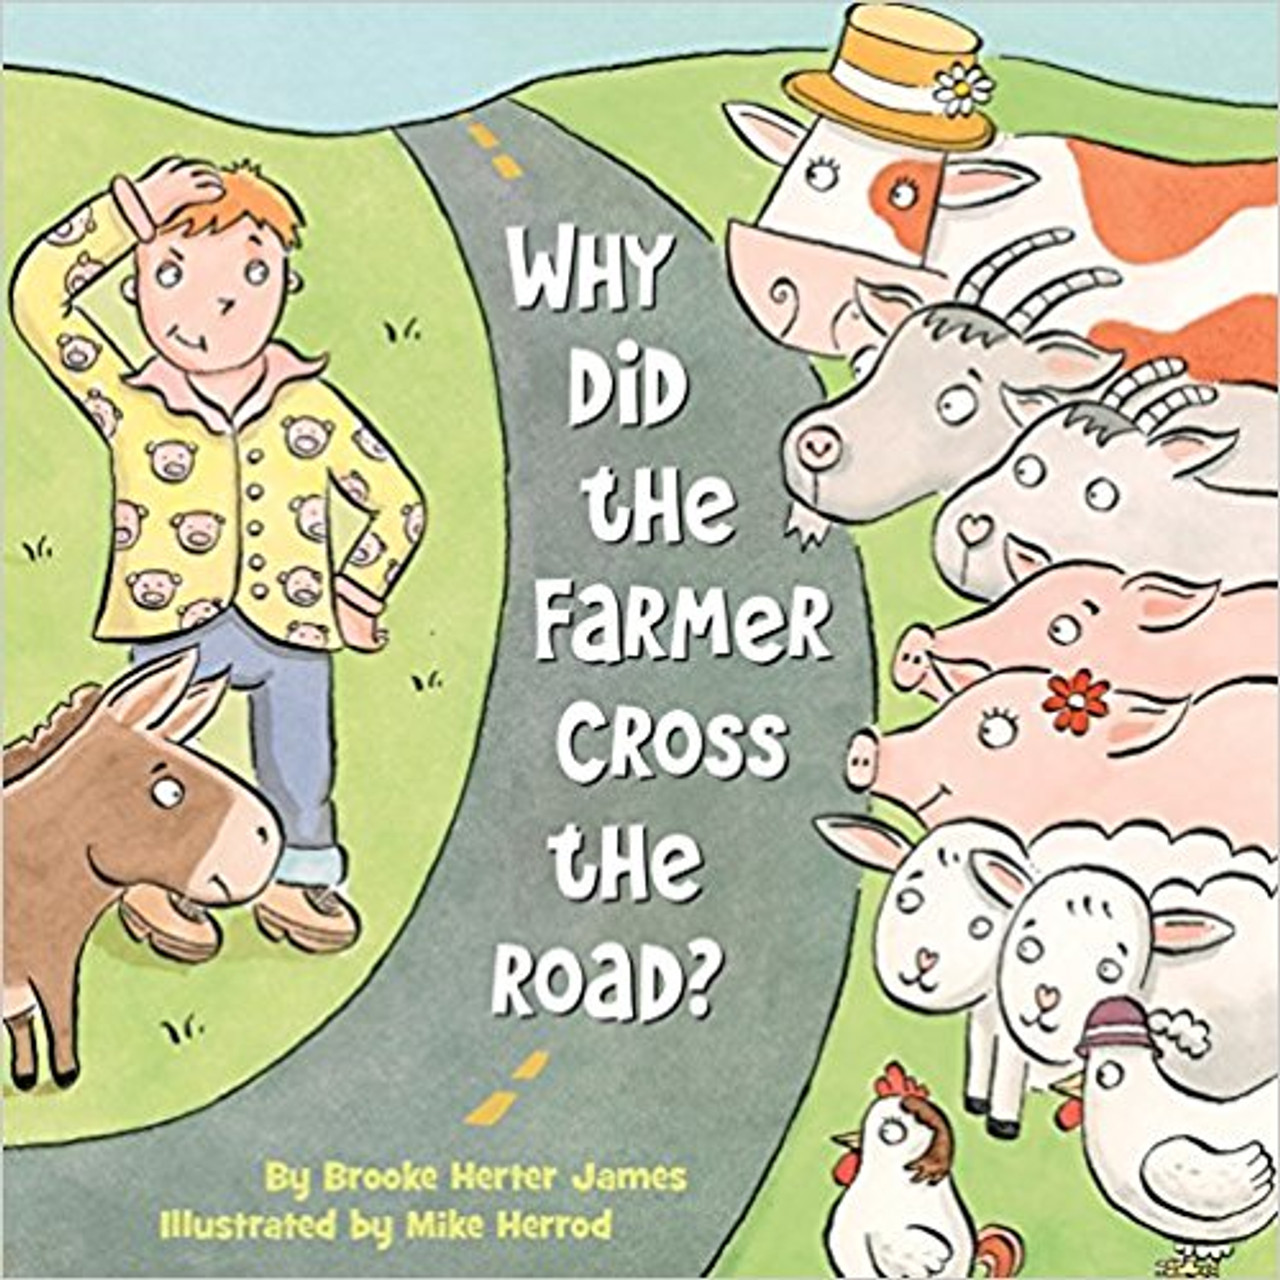 Why Did the Farmer Cross the Road? by Brooke Herter James